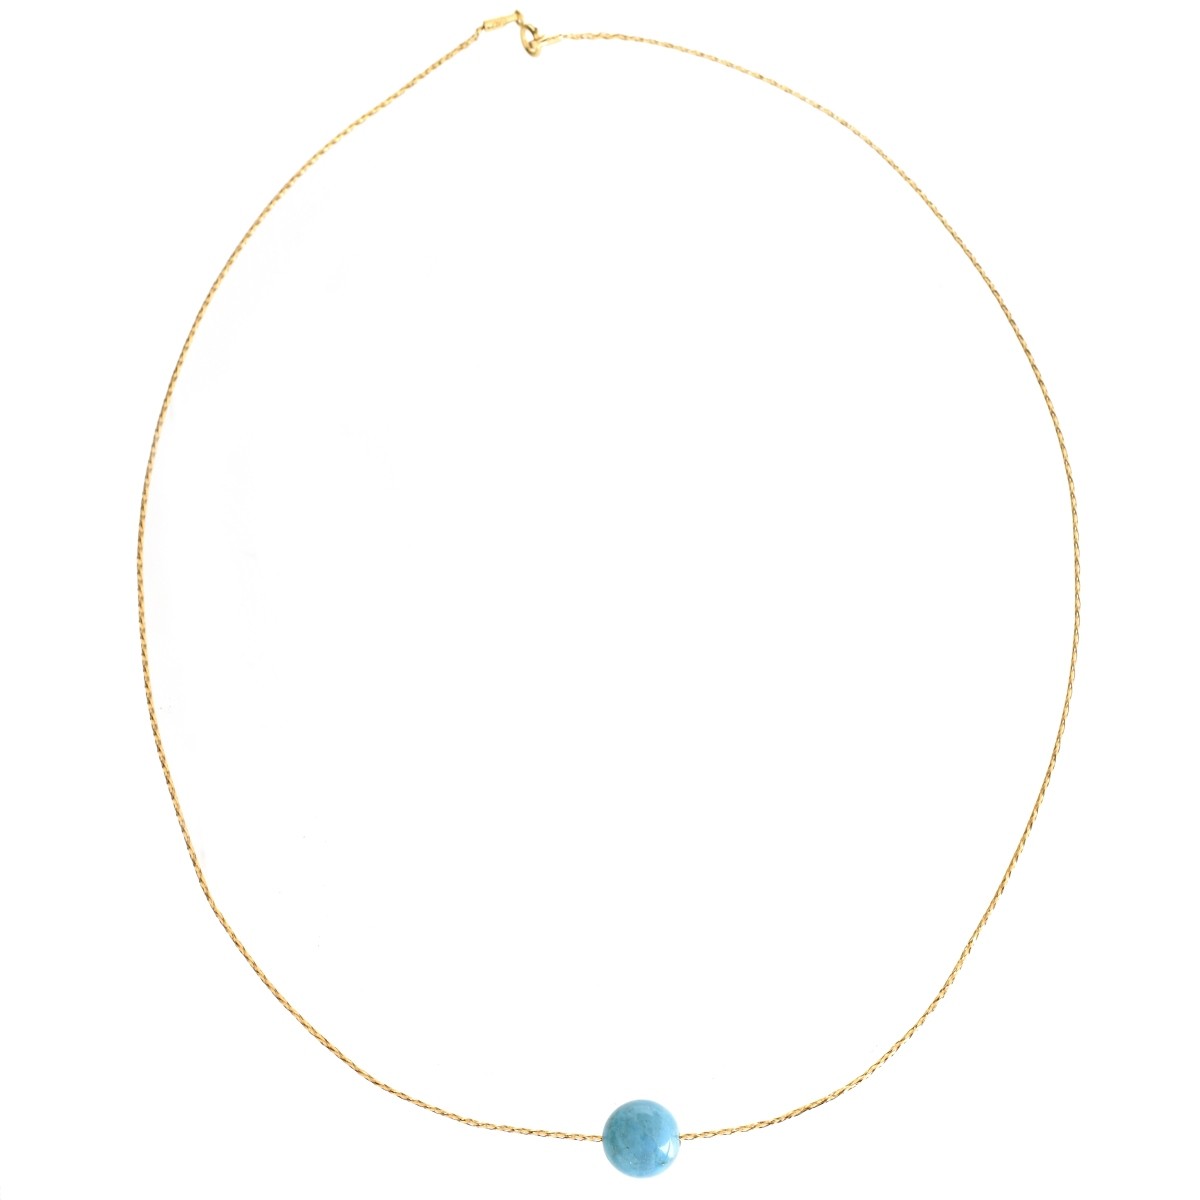 Turquoise and 14K Necklace and Earrings